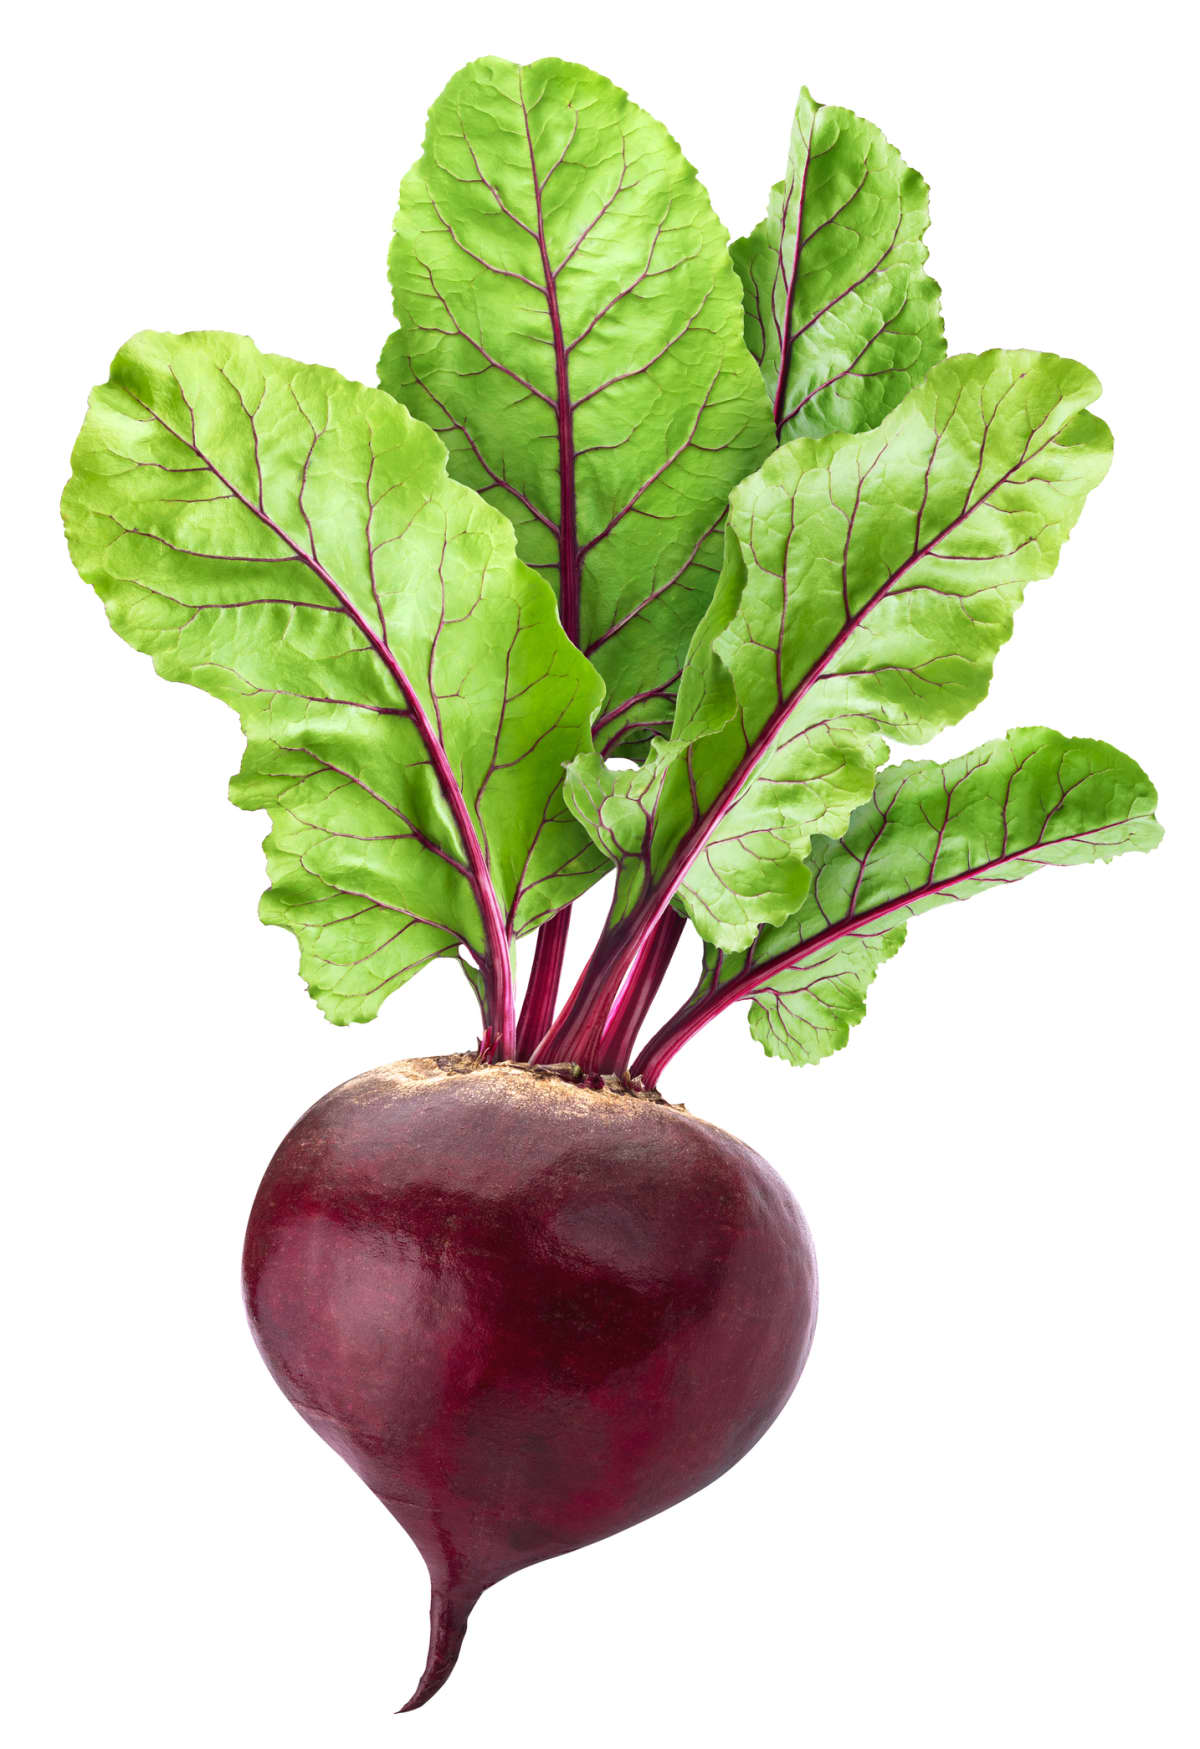 Beetroot isolated on white background with clipping path, one whole beet with leaves